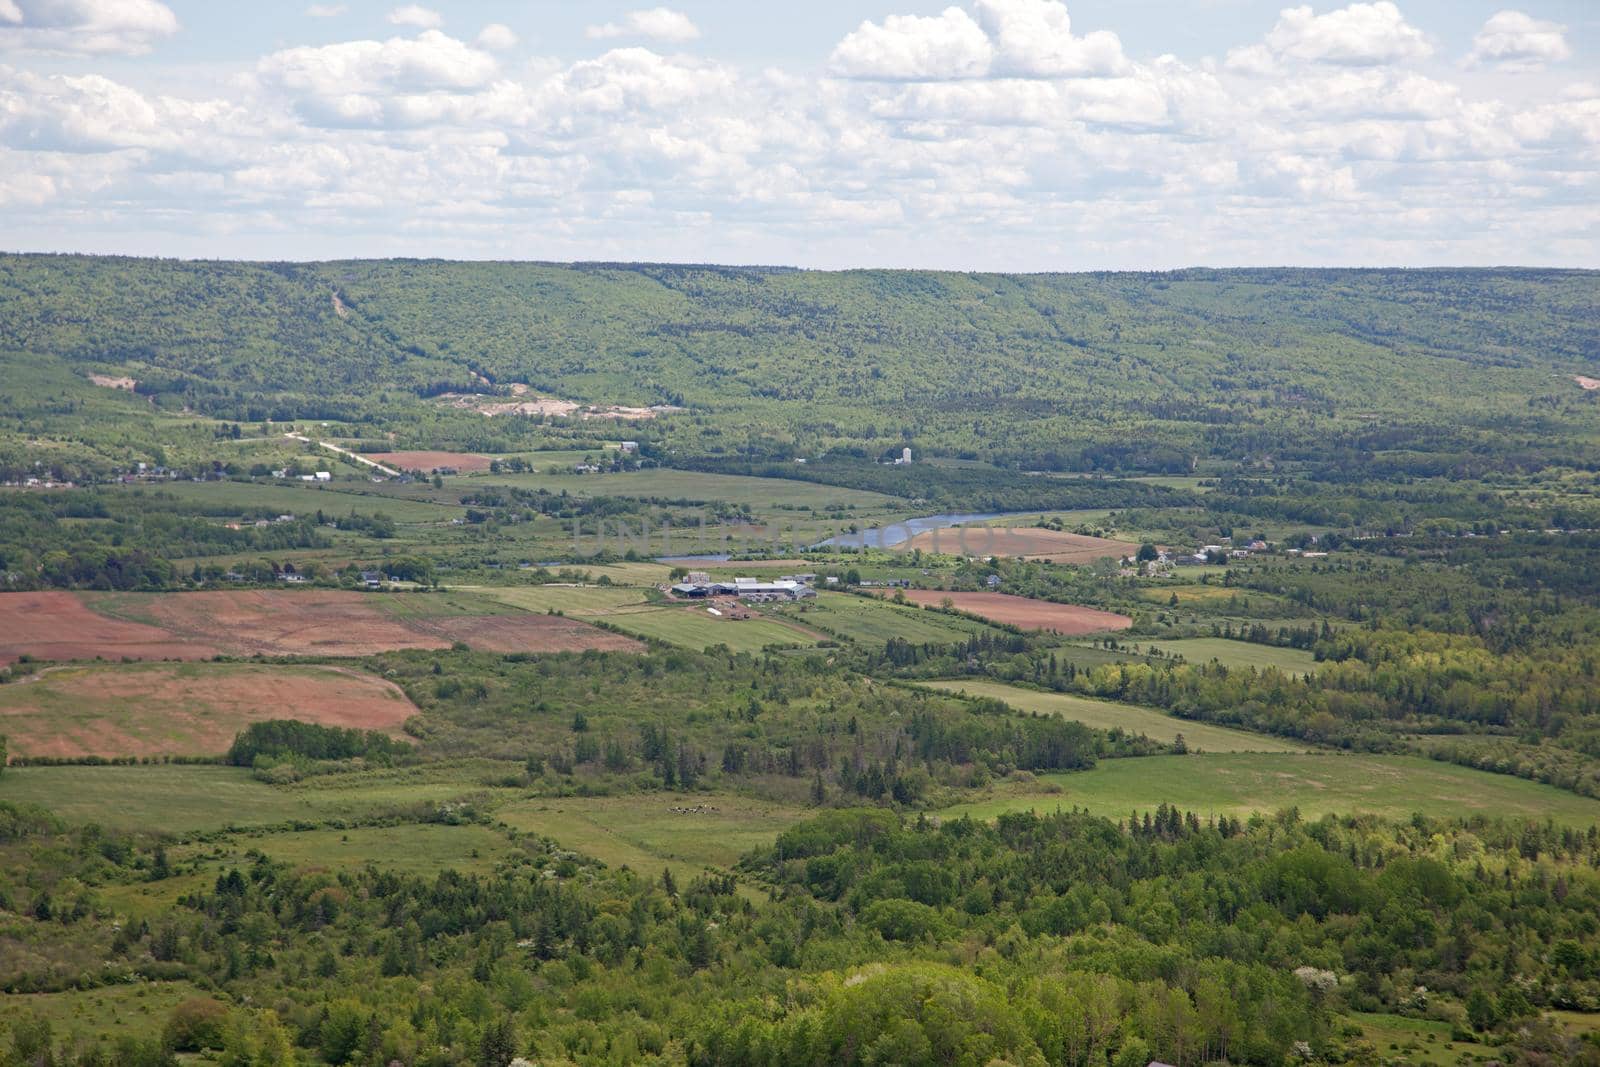 Looking down to the Bridgetown section of the beautiful Annapolis Valley in Nova Scotia, Canada, with the Annapolis River wandering through 